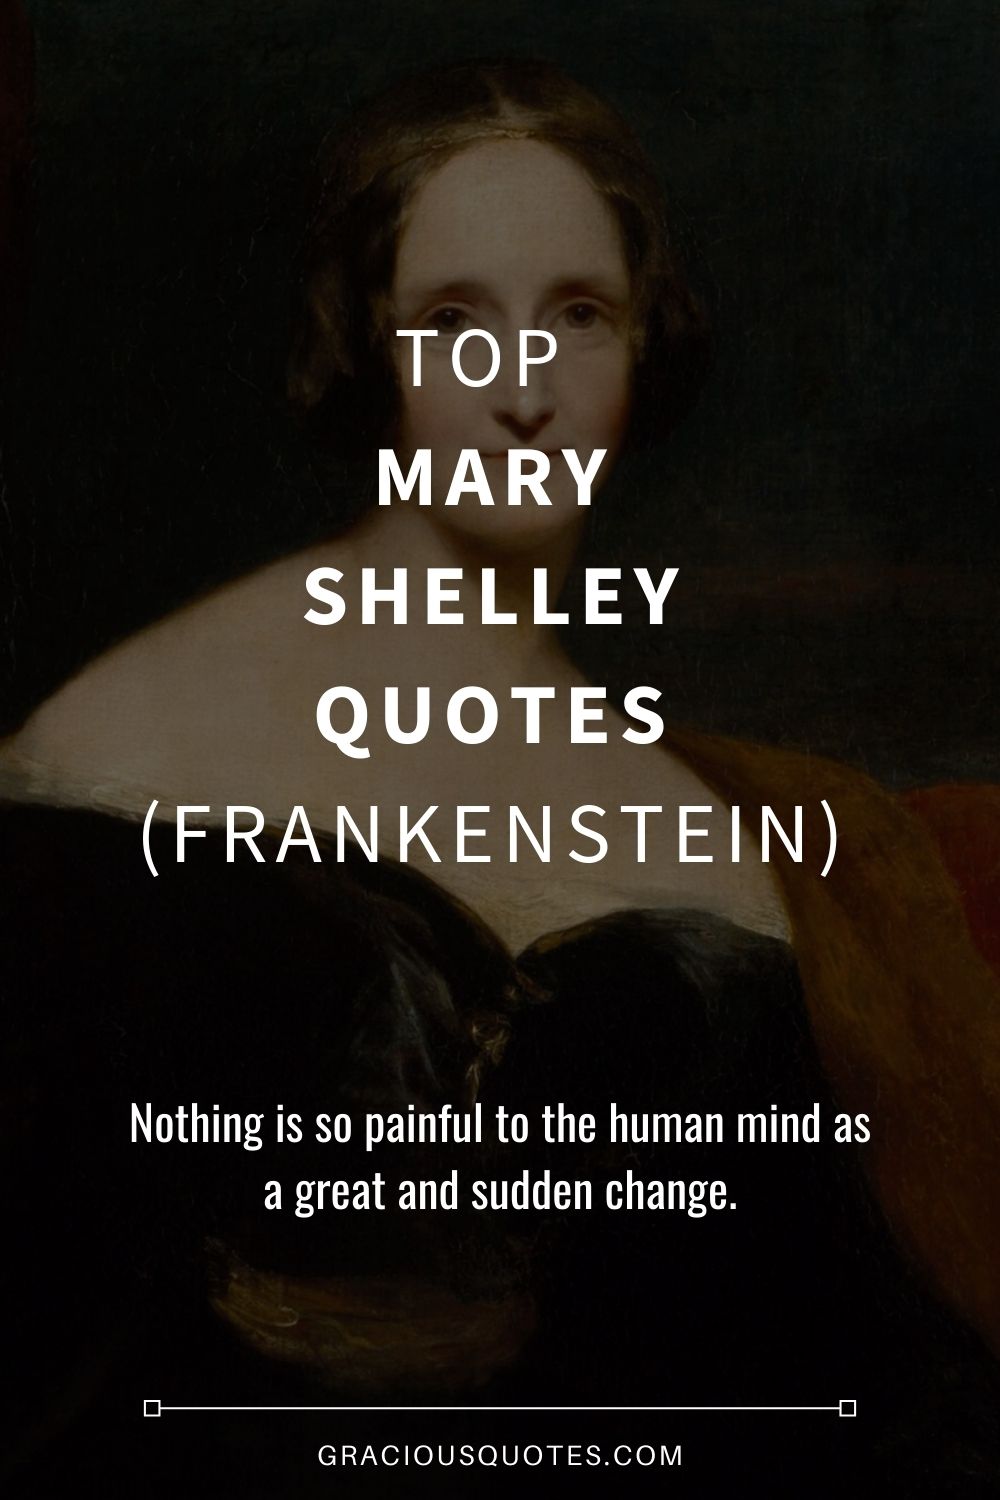 Top Mary Shelley Quotes (FRANKENSTEIN) - Gracious Quotes